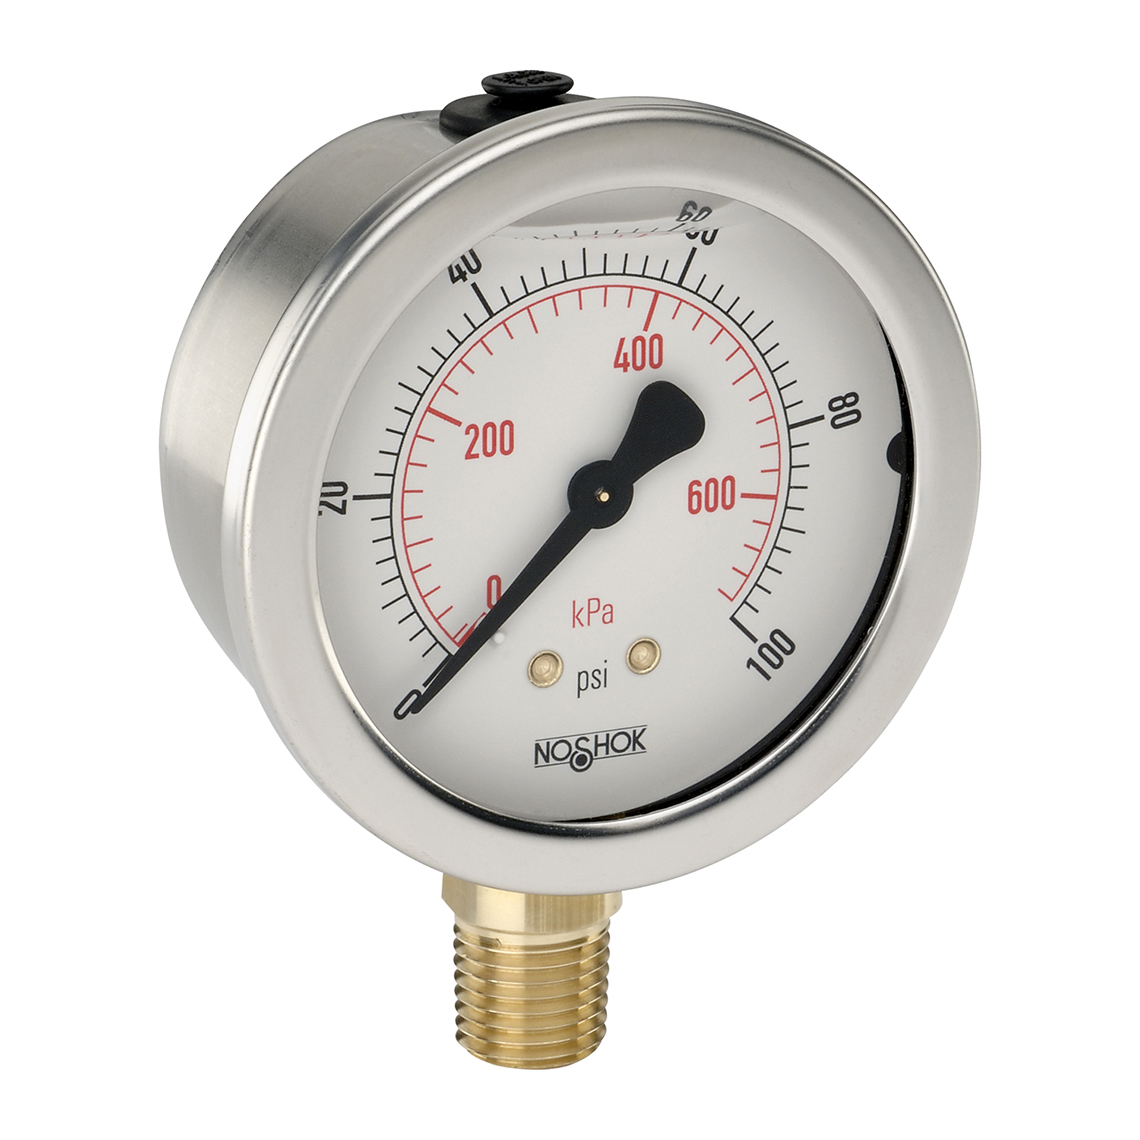 25-901-160-psi/kPa-GY40 900 Series ABS and Stainless Steel Liquid Filled Pressure Gauges